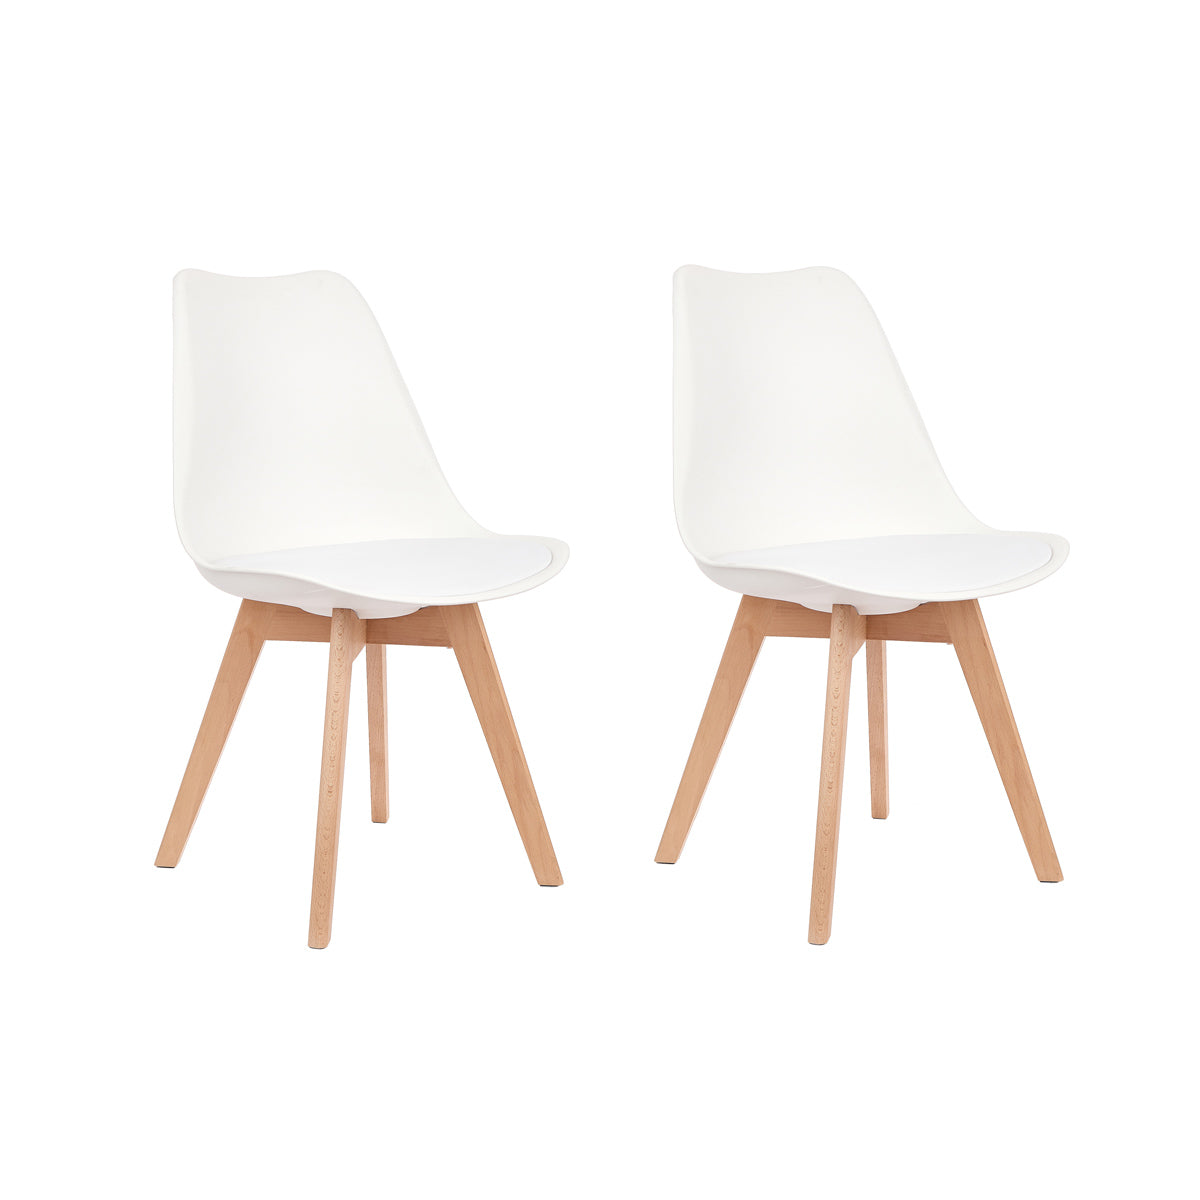 Set of 2 Tulip Side Chair